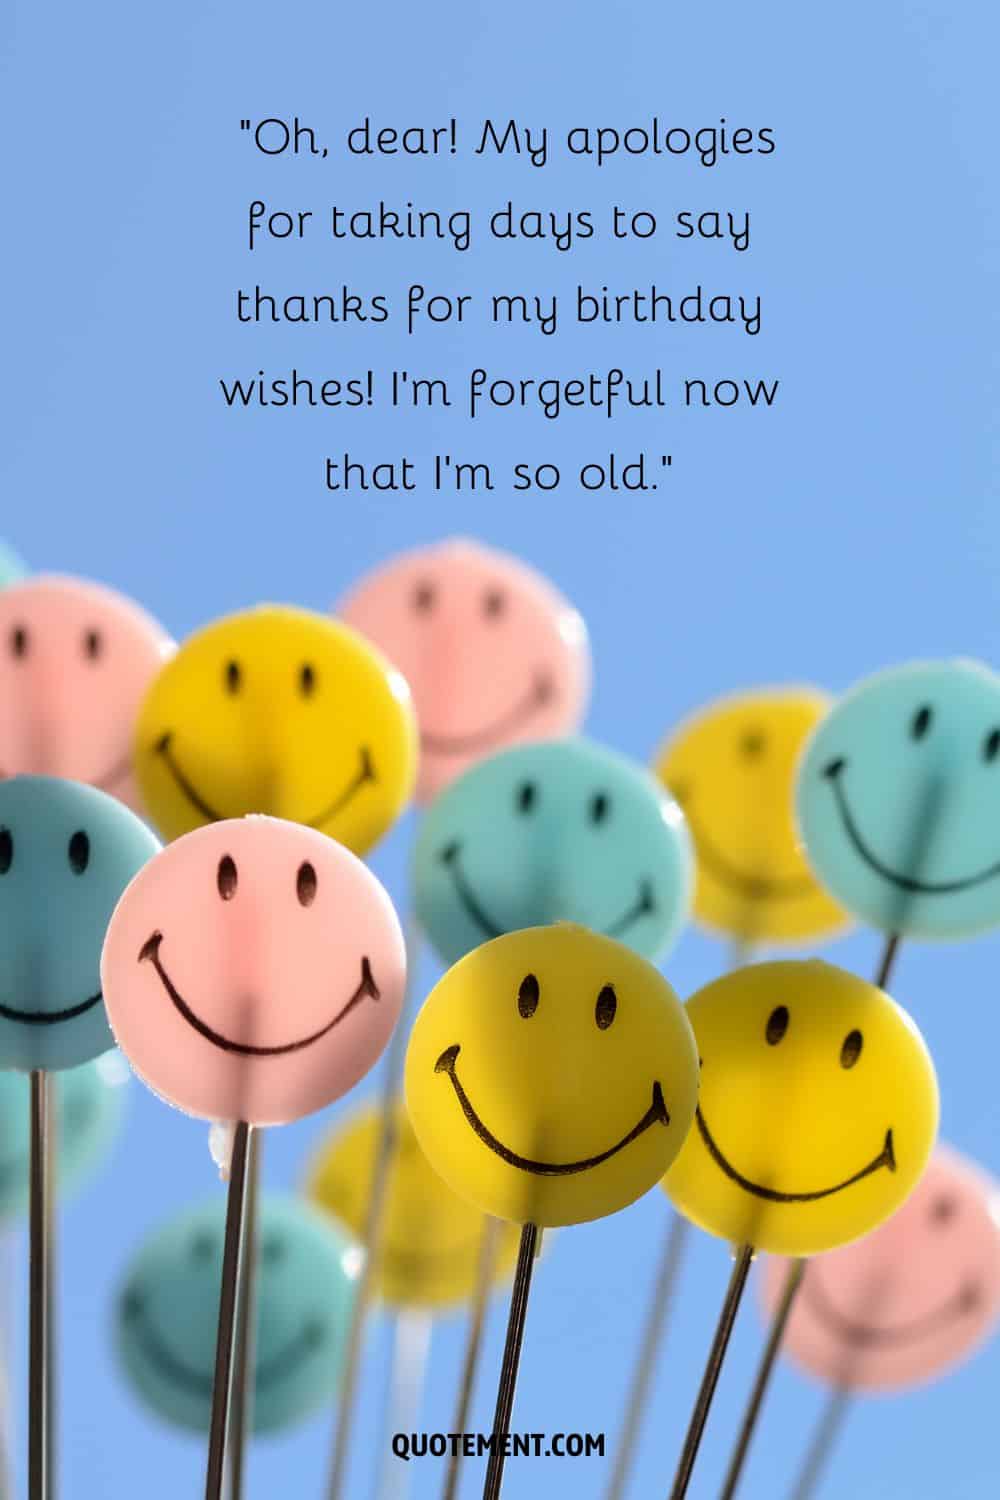 Oh, dear! My apologies for taking days to say thanks for my birthday wishes!